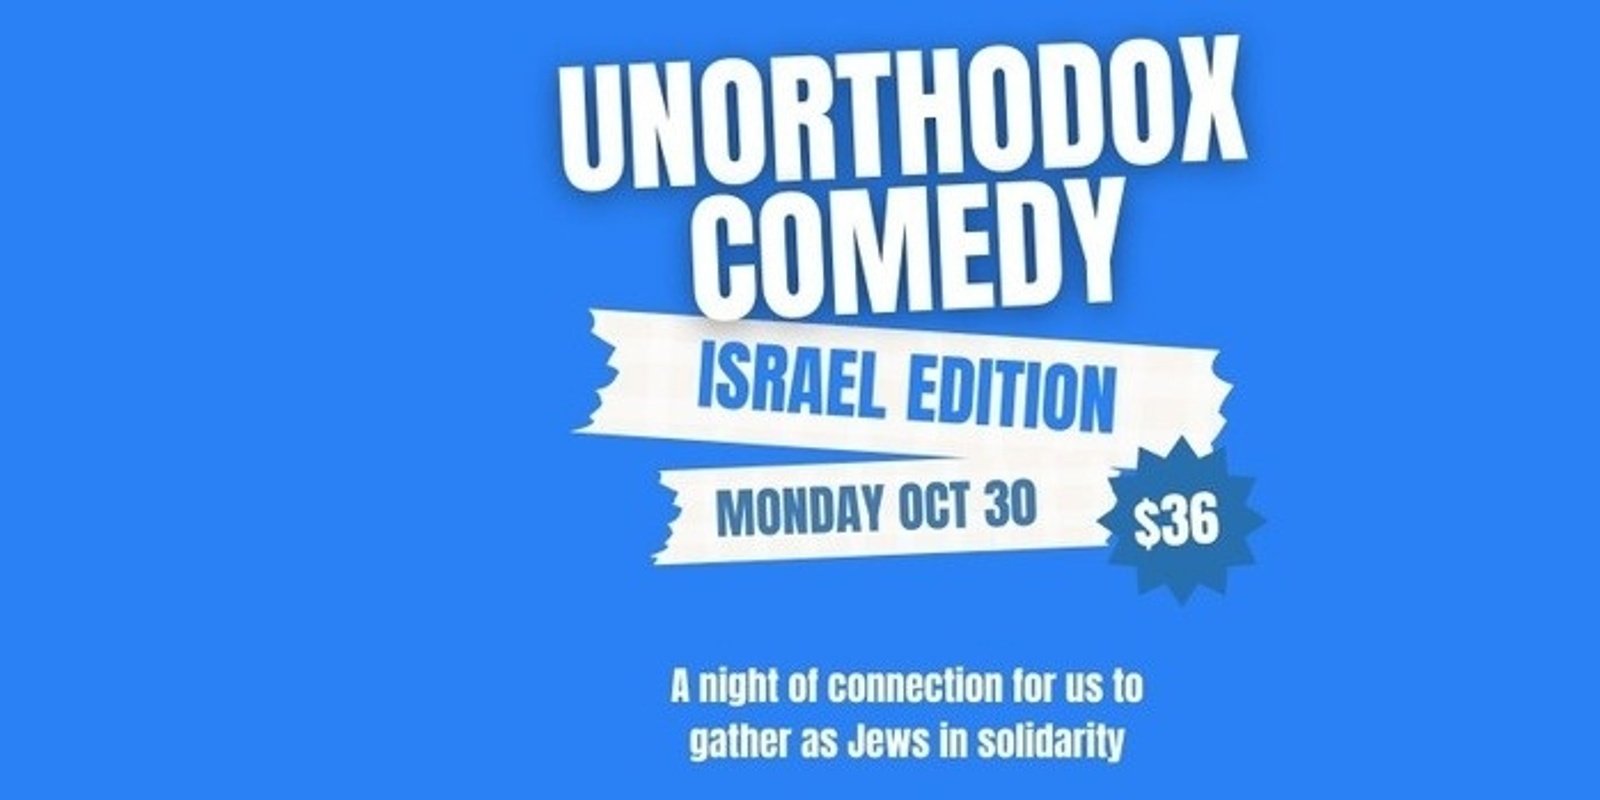 Banner image for UnOrthodox Comedy Israel Edition 